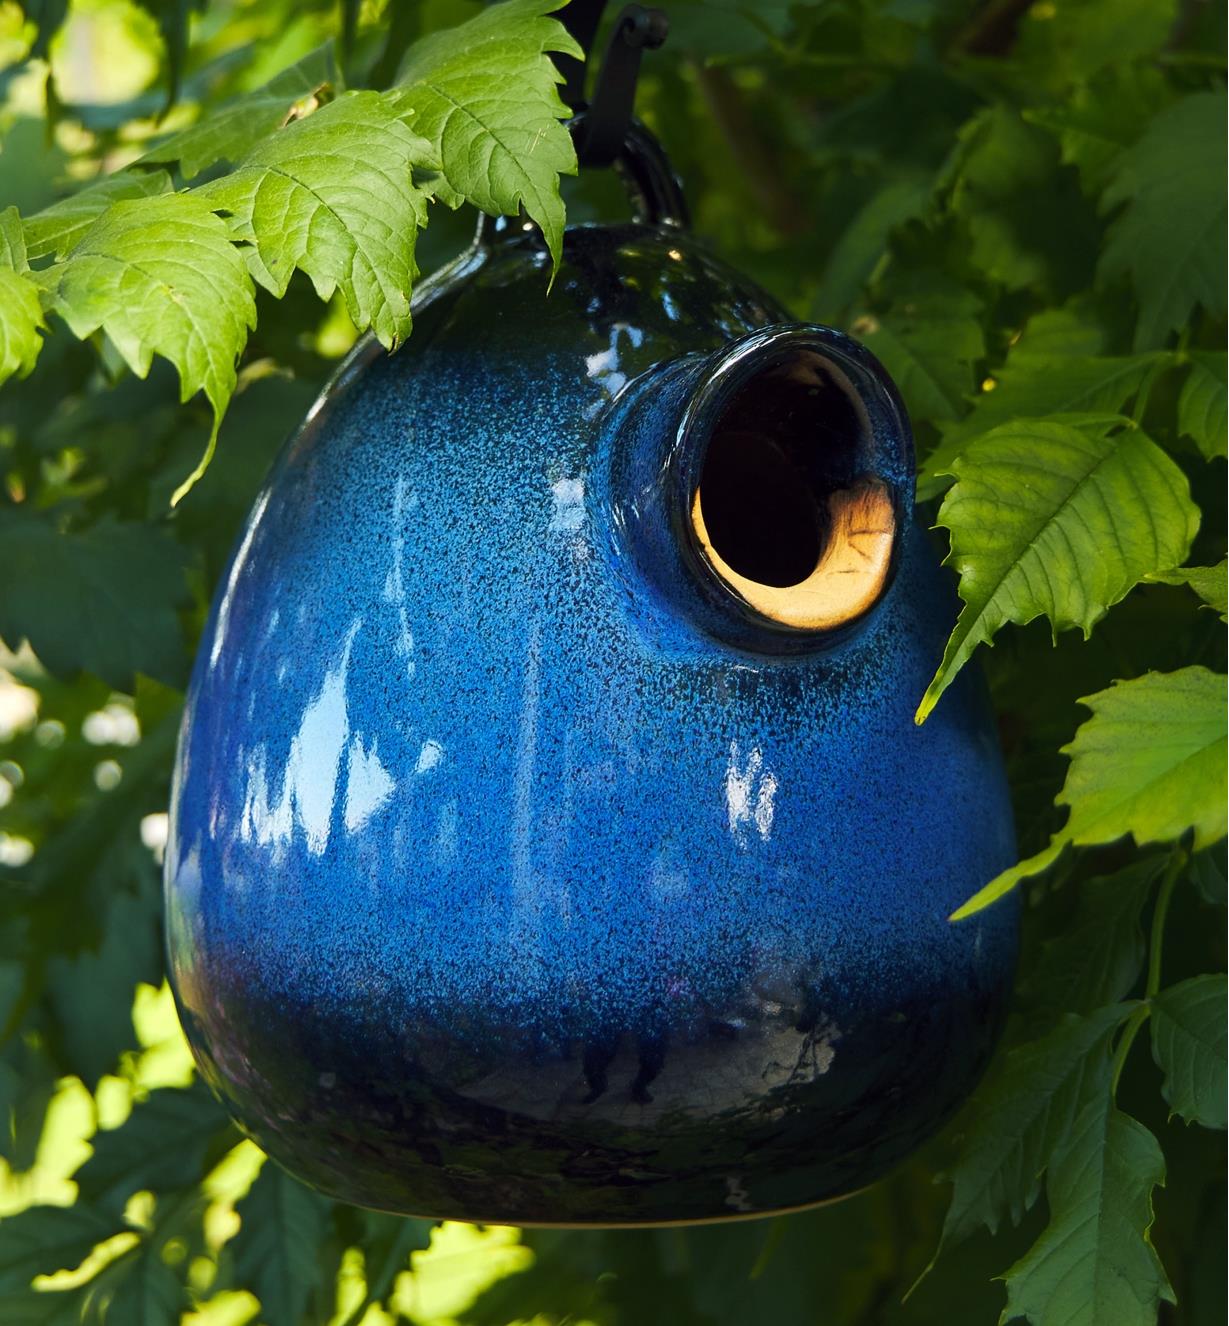 The ceramic bird home hanging in a tree